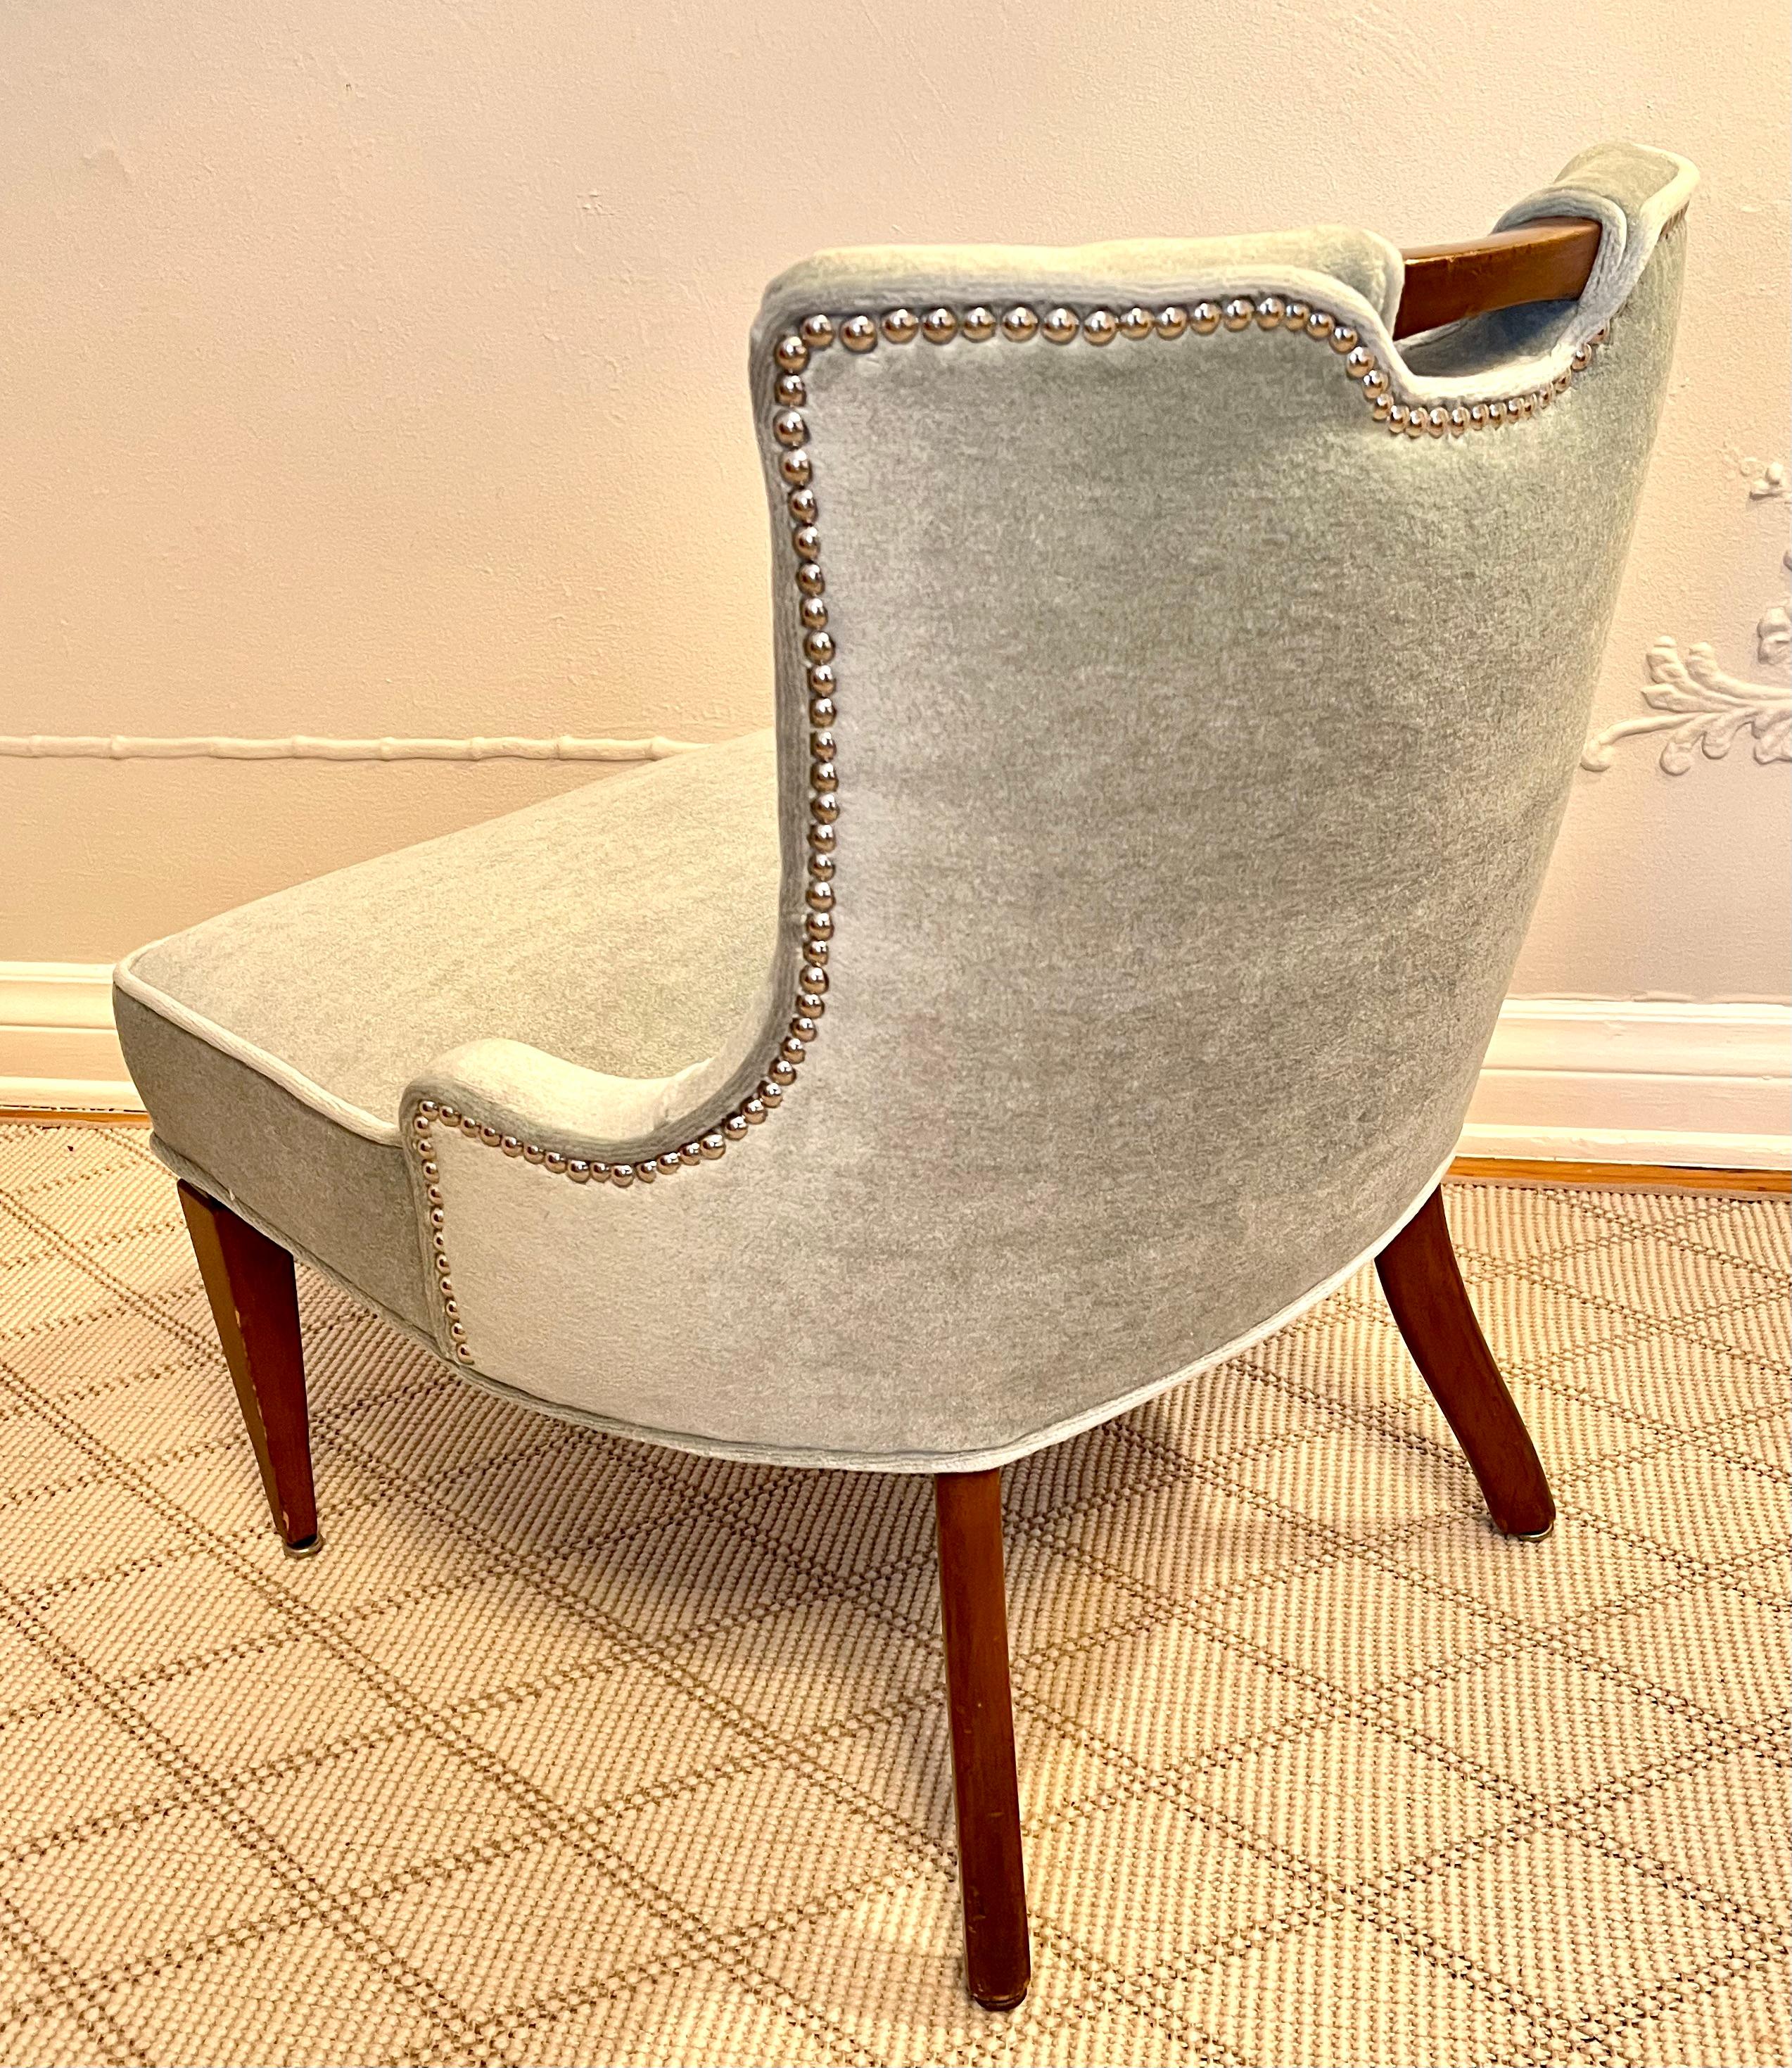 Upholstery Vanity Chair Upholstered in Mohair with Wood Handle and Nail Details